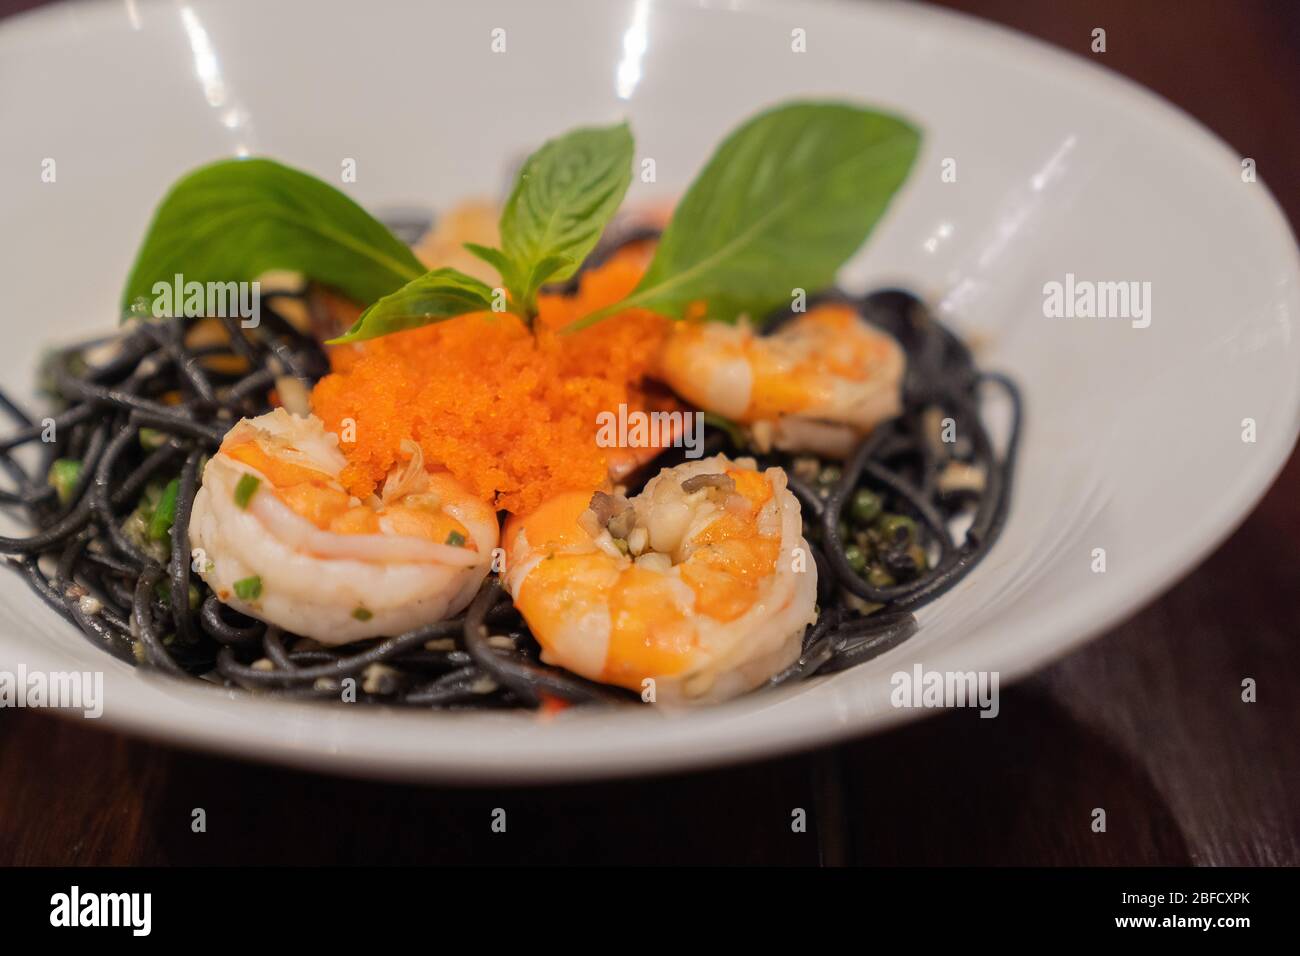 Close up. Black Spaghetti sea food with big shrimp and egg fish on white dish, on wood table. Italian food. Italy food style. Top view. Stock Photo